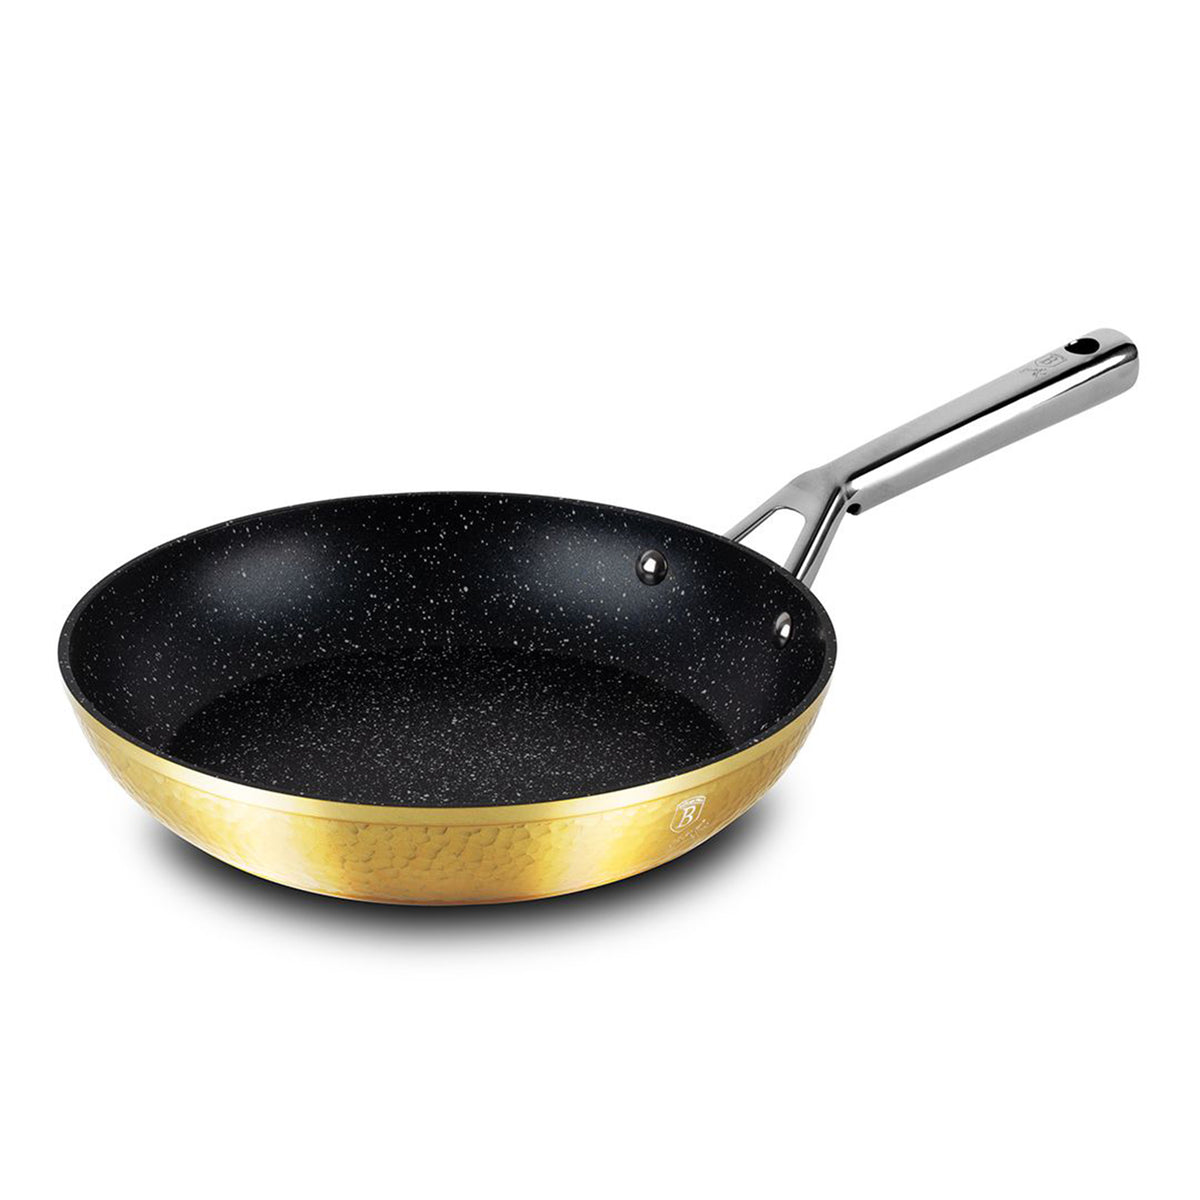 Hammered frypan 32 cm with stainless steel handle gold color